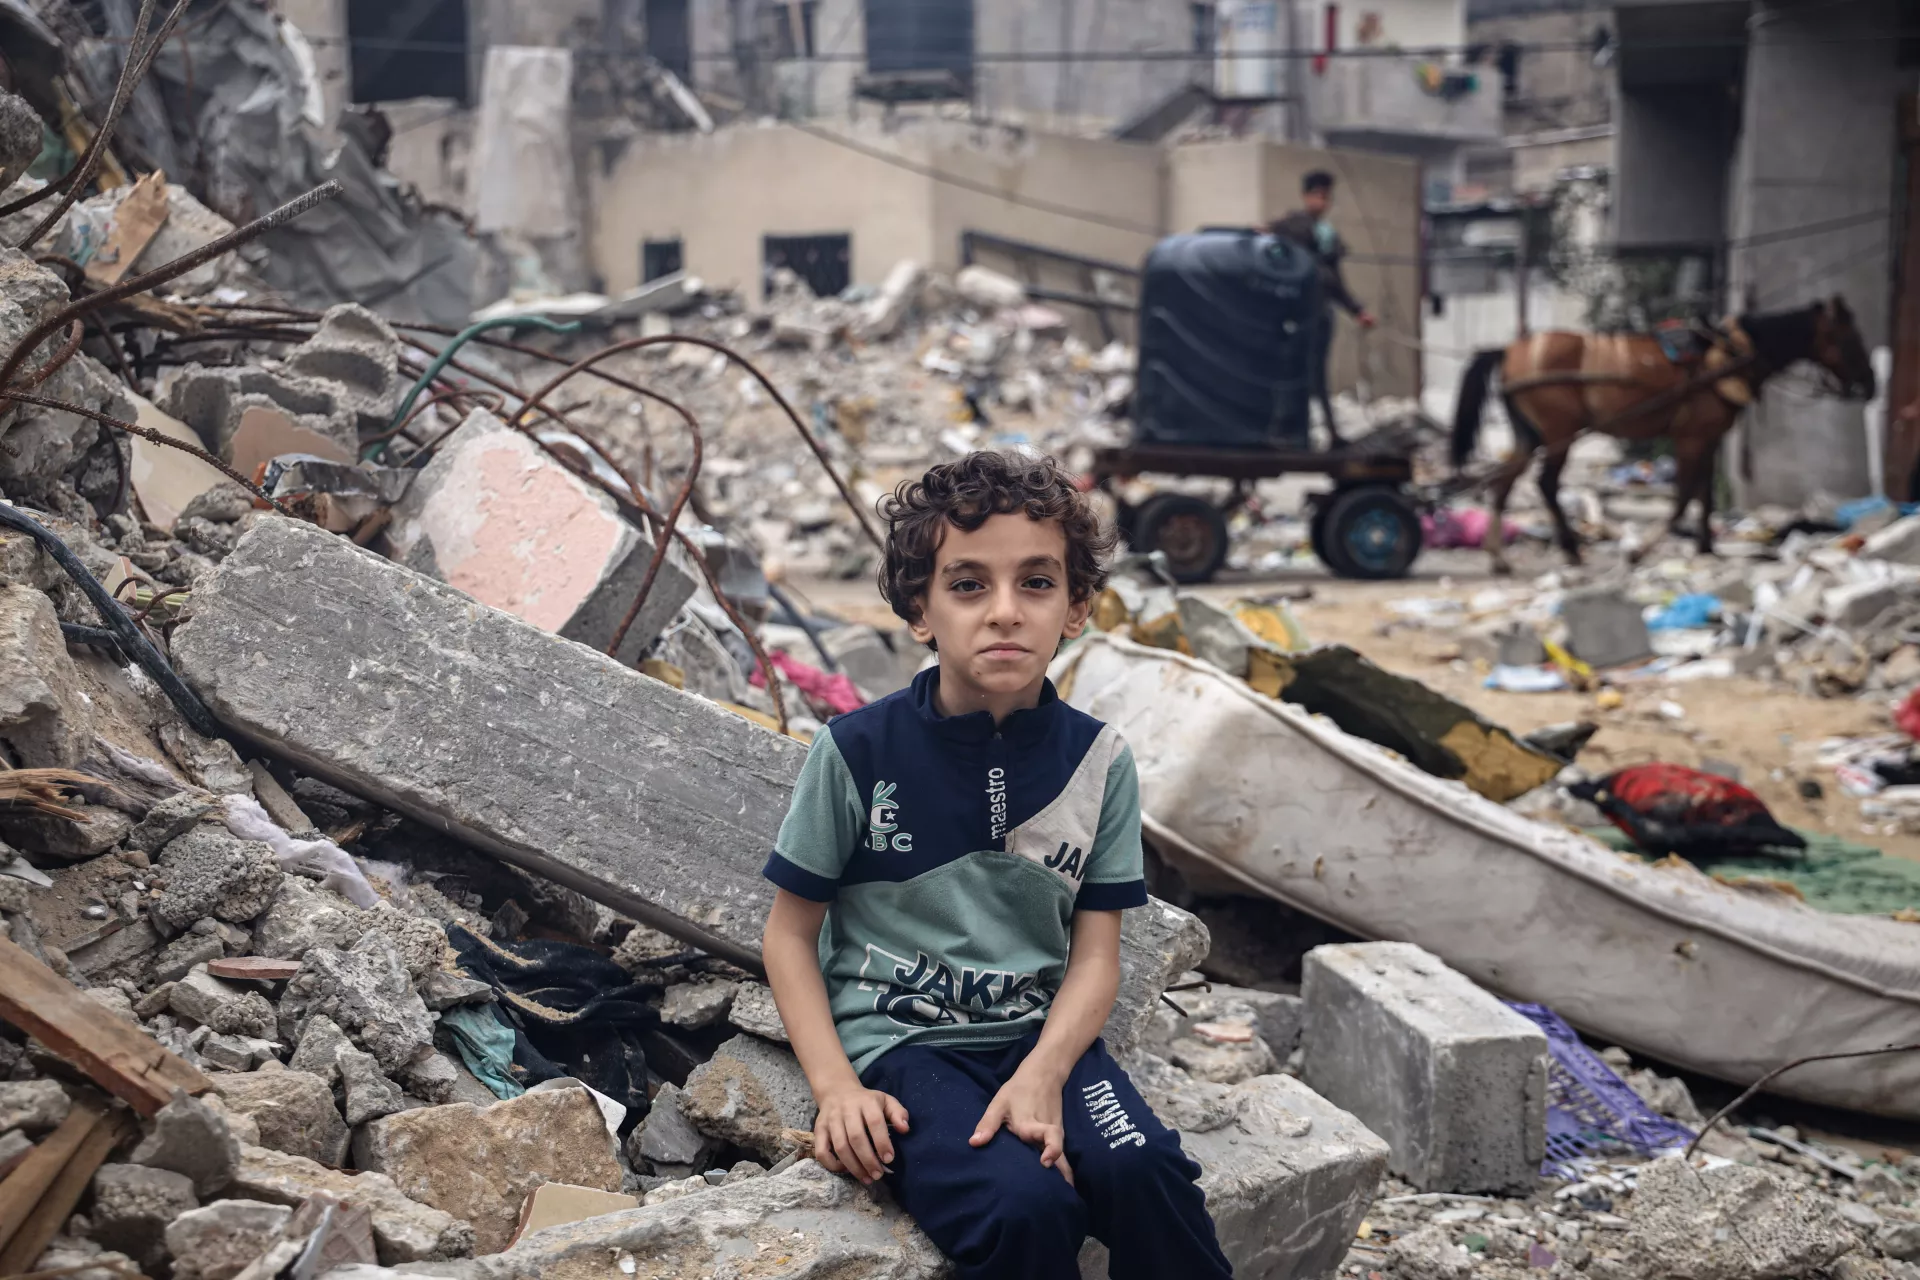 Mohammed Alattar, 8-year-old from Rafah City, sits on the rubble of his family's house, which was bombed in an Israeli airstrike.